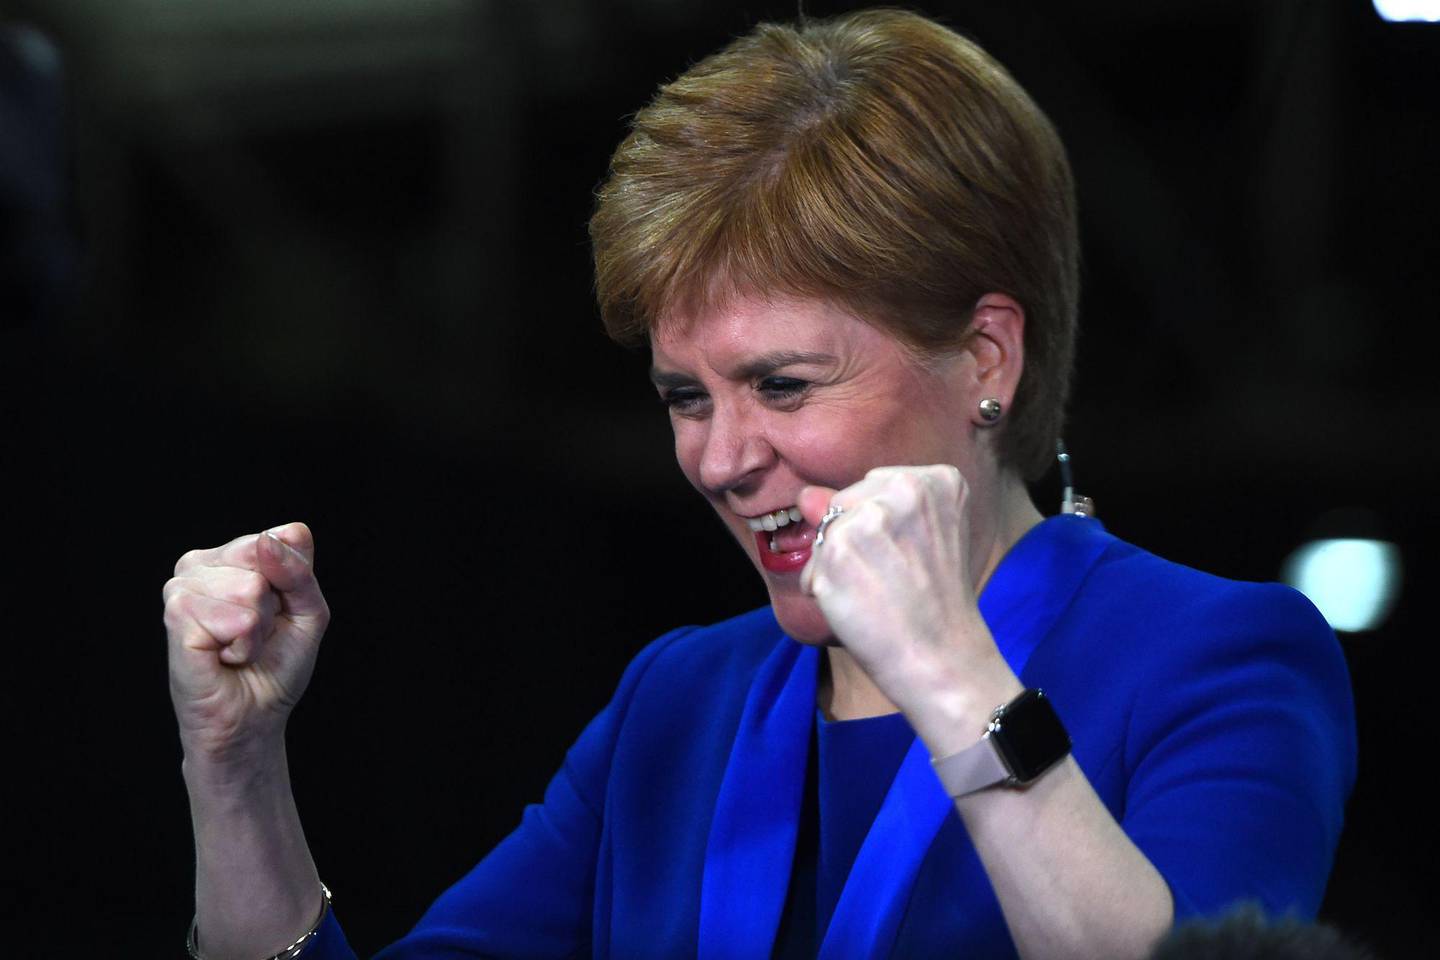 Scottish National Party (SNP) leader and Scotland's First Minister Nicola Sturgeon celebrates as she hears that New Scottish National Party (SNP) MP for Dunbartonshire East, Amy Callaghan has unseated Britain's Liberal Democrat leader Jo Swinson, at the count centre in Glasgow on December 13, 2019 after votes are counted in the UK general election. (Photo by ANDY BUCHANAN / AFP)